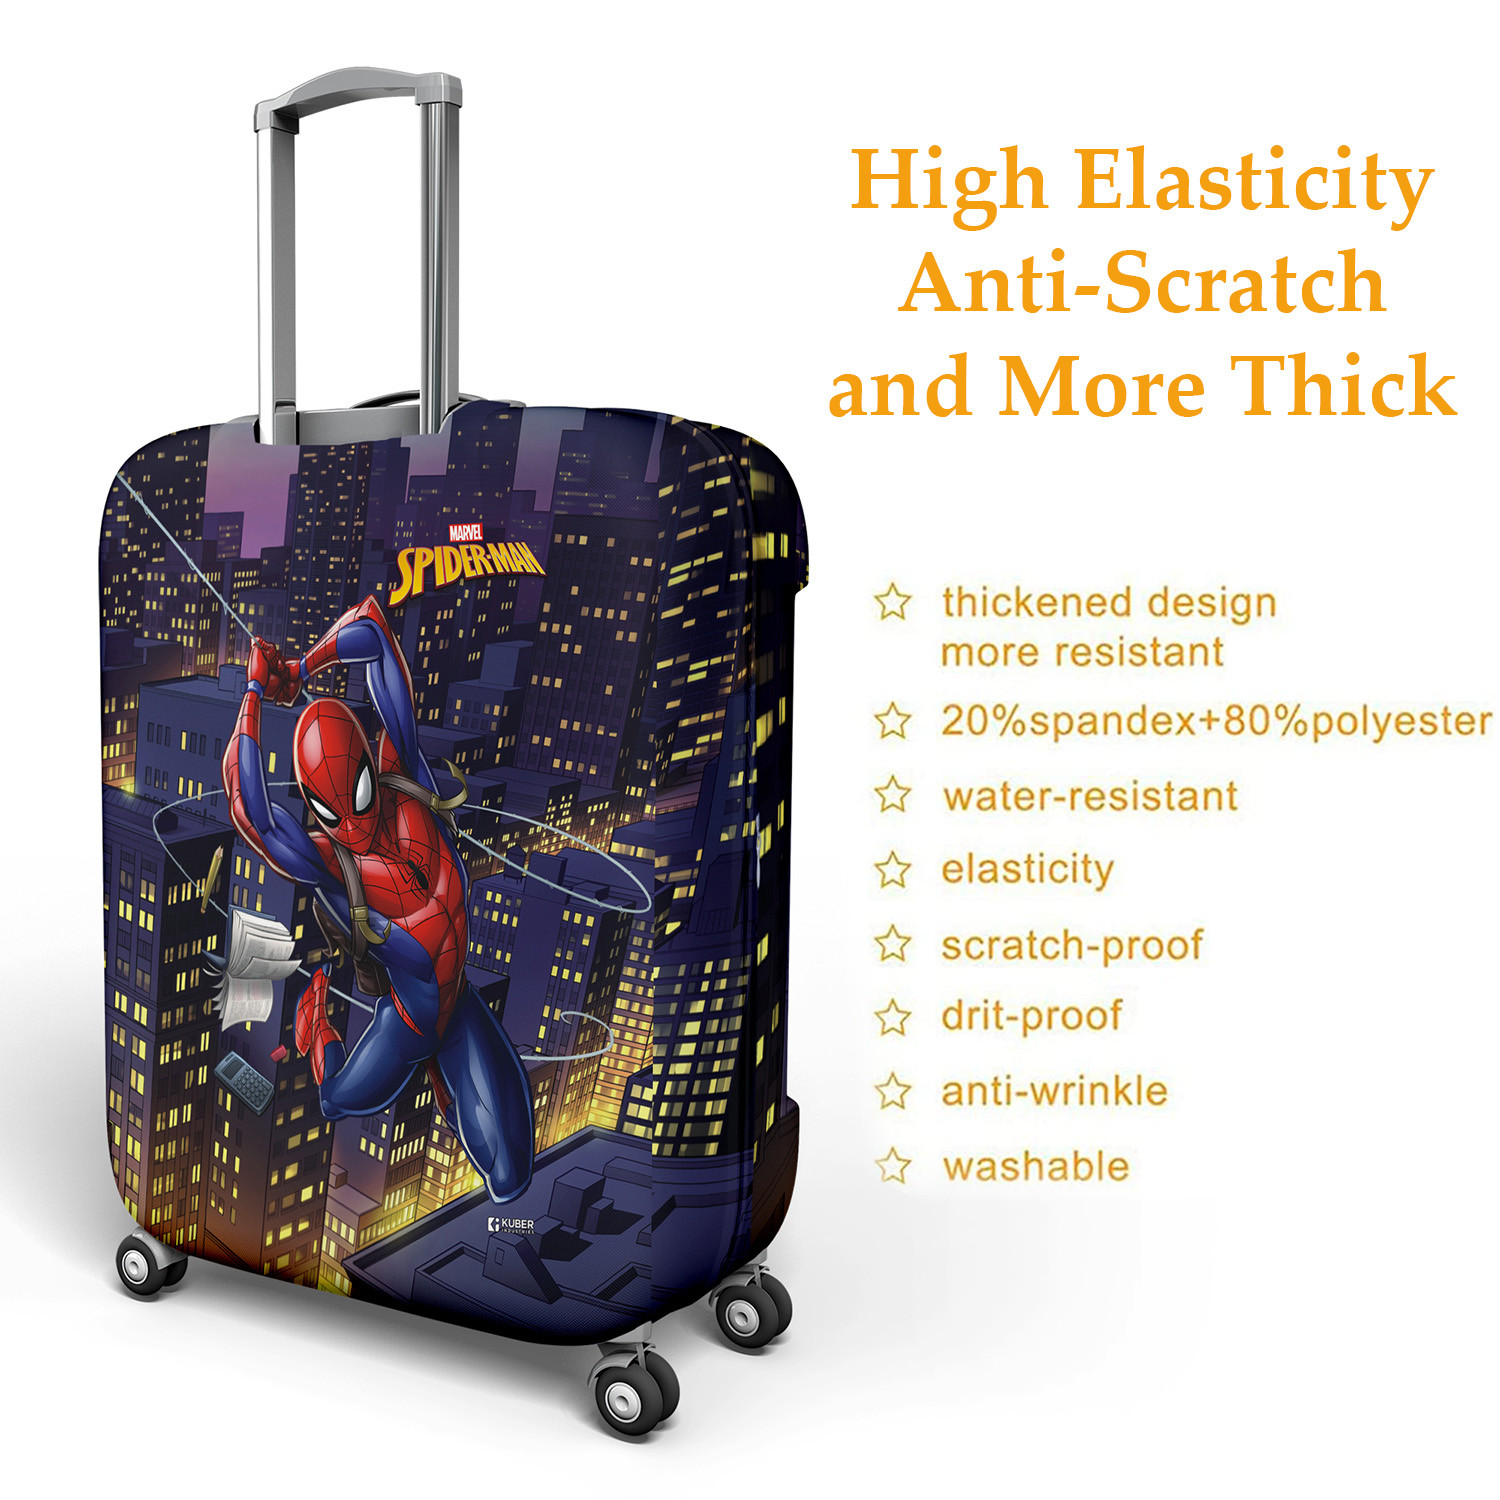 Kuber Industries Marvel Spiderman Luggage Cover | Polyester Travel Suitcase Cover | Washable | Stretchable Suitcase Protector | 22-26 Inch | Medium | Multicolor